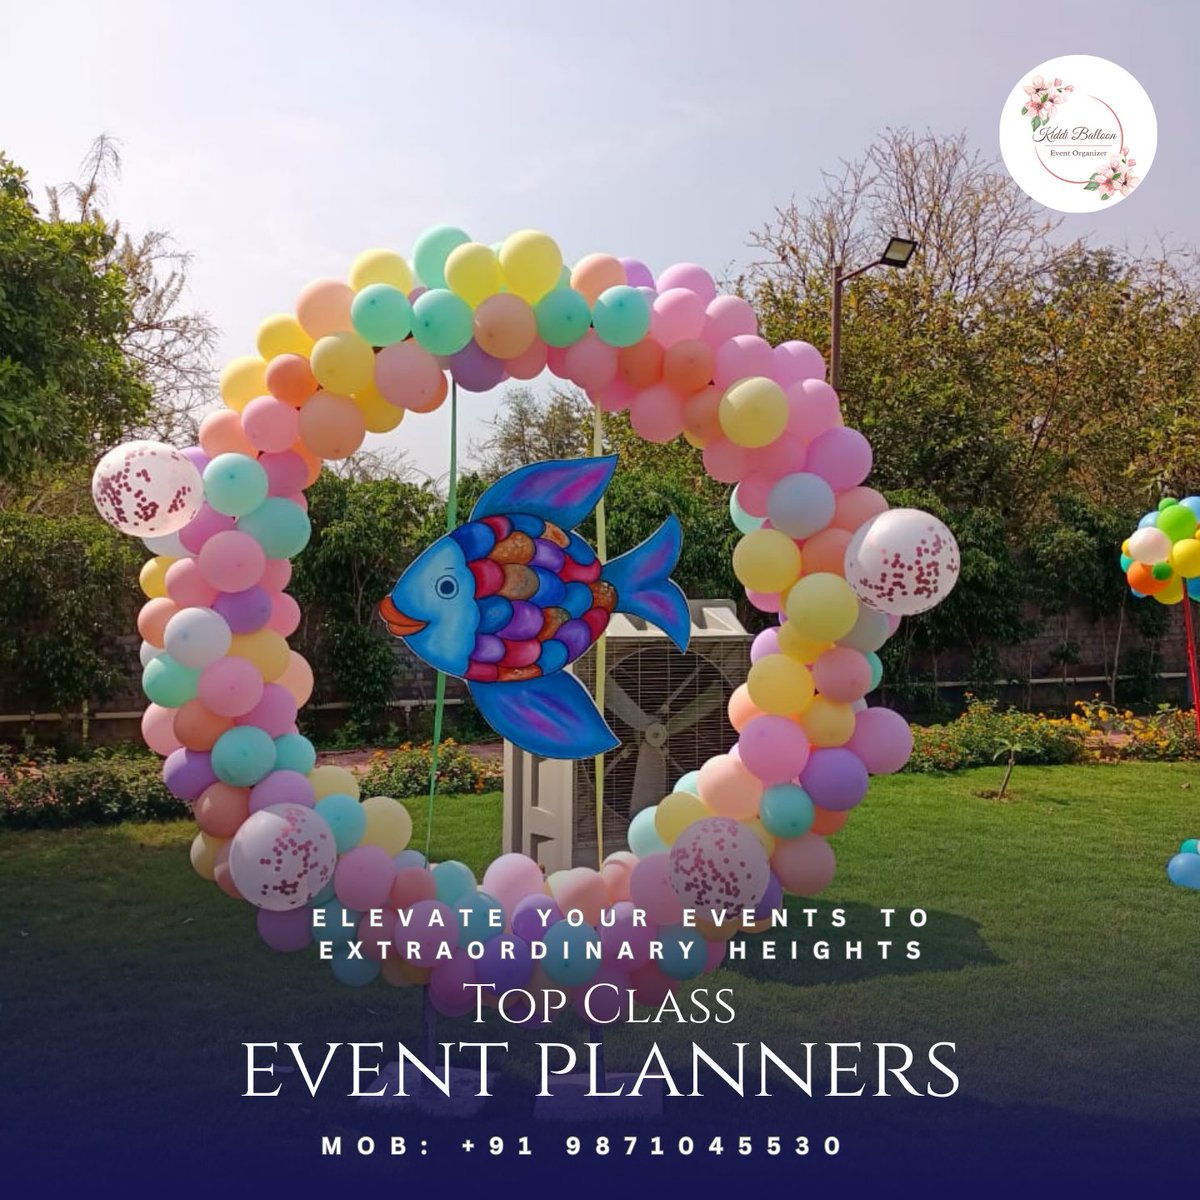 Transform your occasions with our top-tier event services! From concept to reality, we craft unforgettable experiences. Let's make memories together! #EventExcellence #UnforgettableMoments #EventPlanning #CreativeCelebrations #EventProfs #PartyPlanners